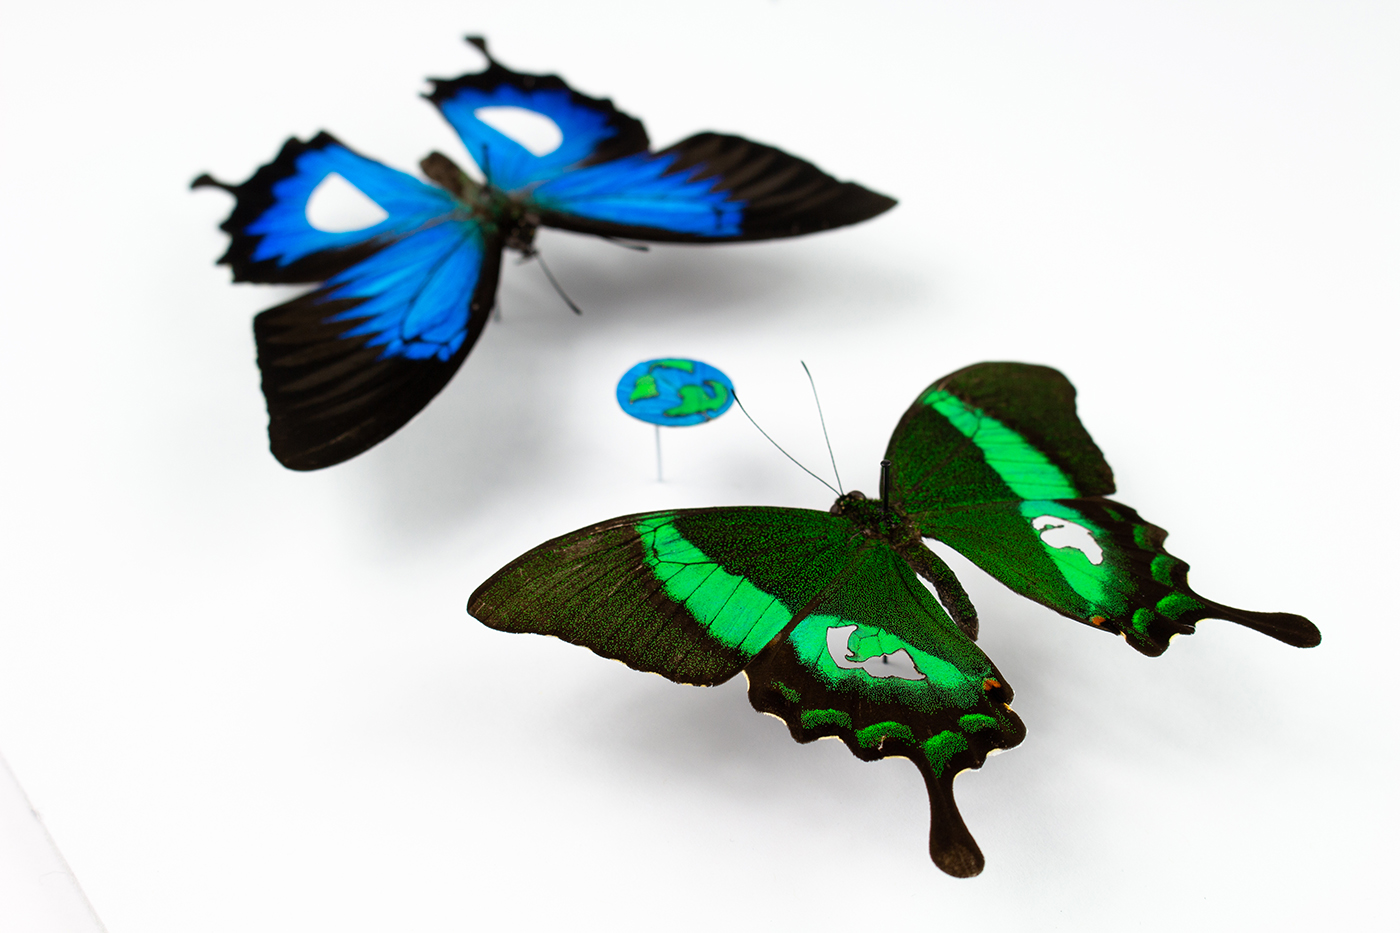 Greta taxidermy artwork, showing two real butterflies cut into planet earth